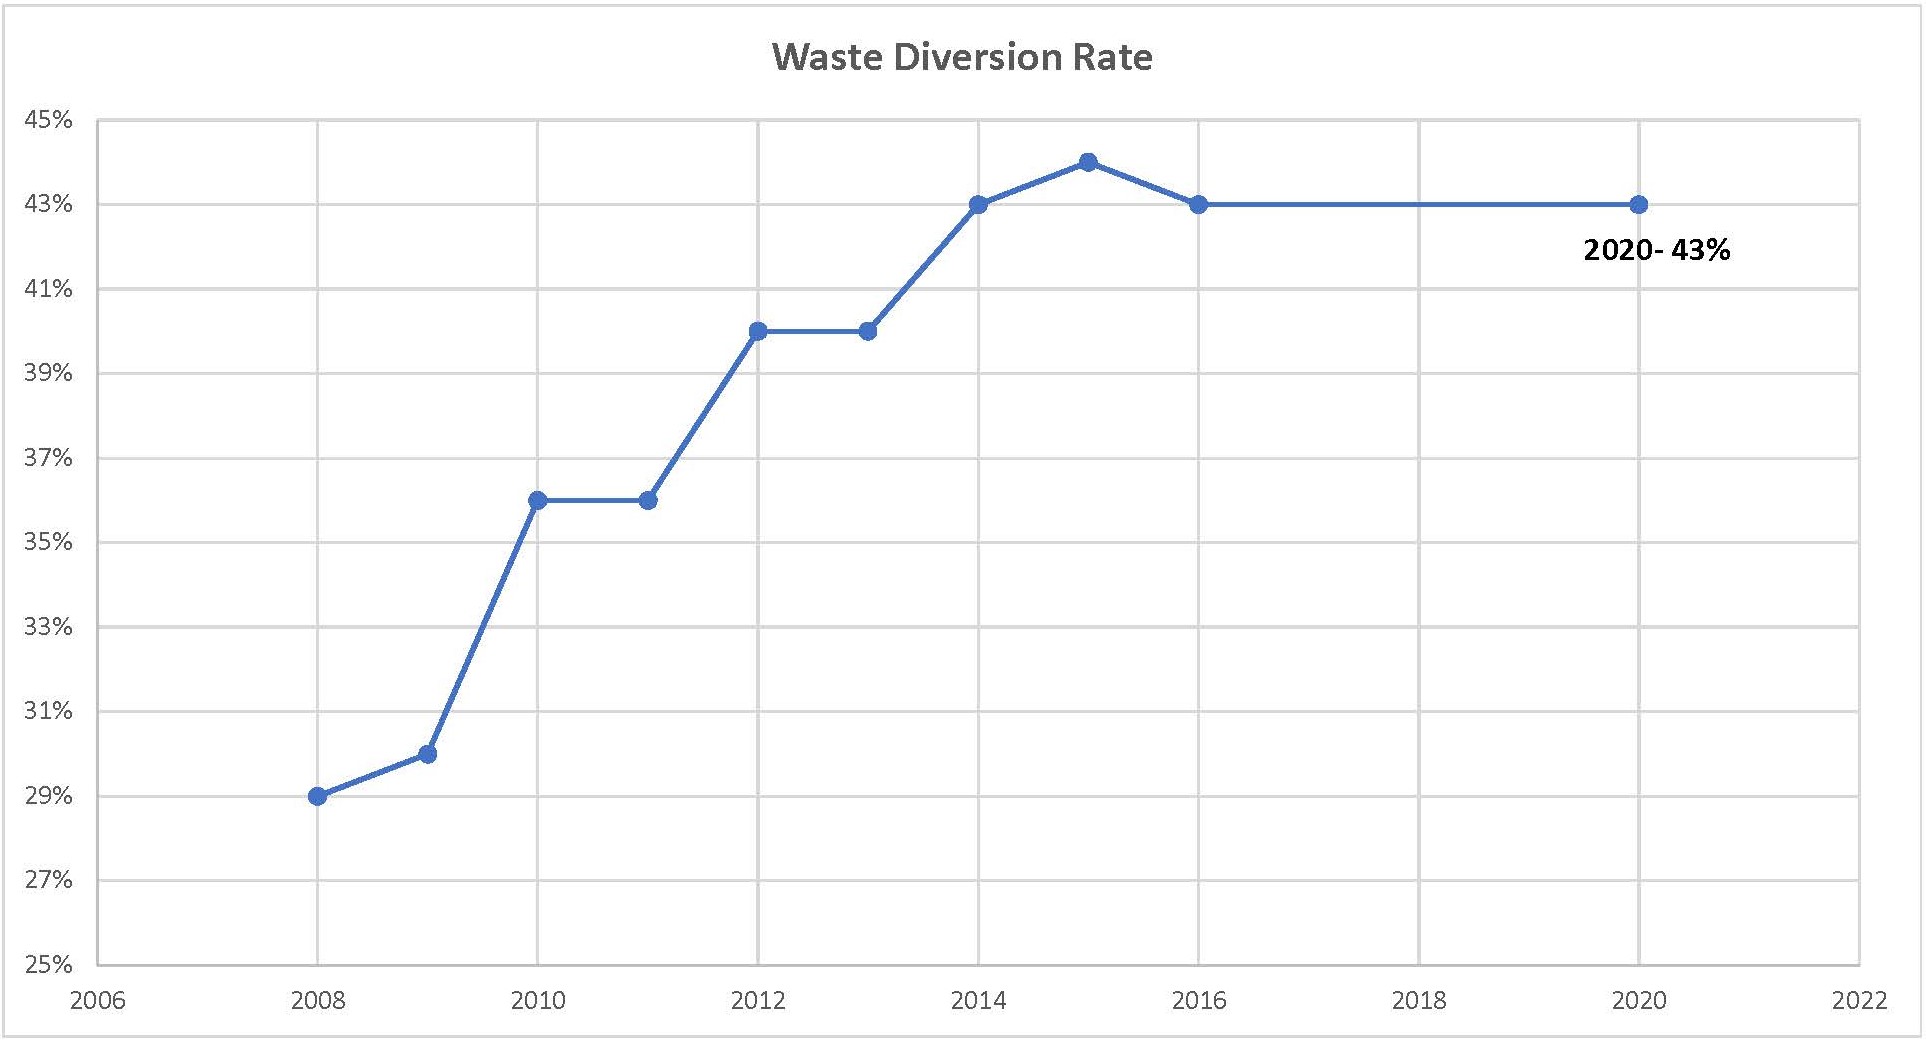 Graph of County of Kauai Waste Diversion Rate from 2008-2020